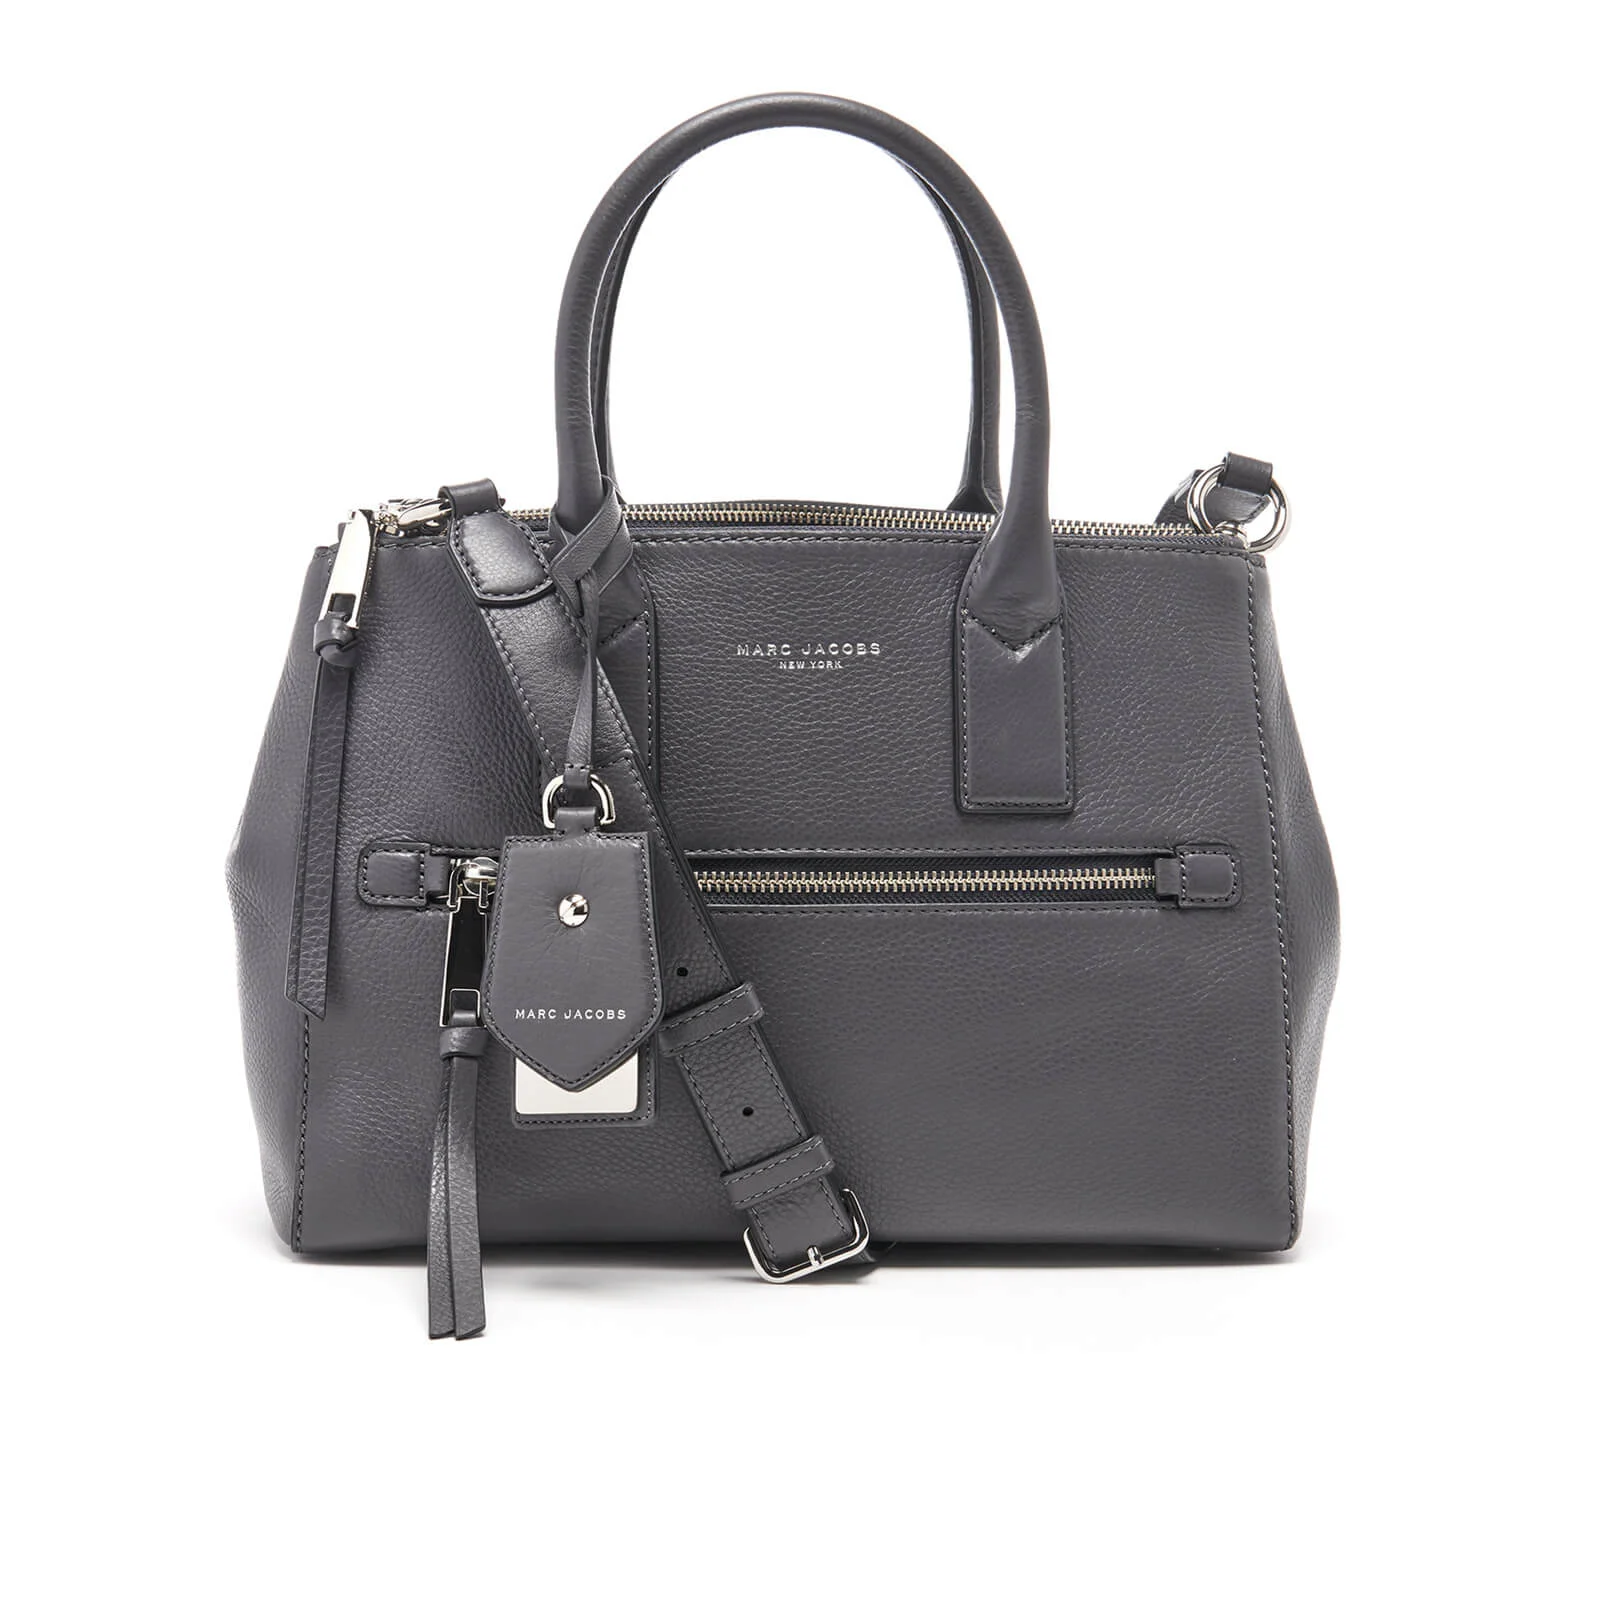 Marc Jacobs Women's East West Tote Bag - Shadow Image 1